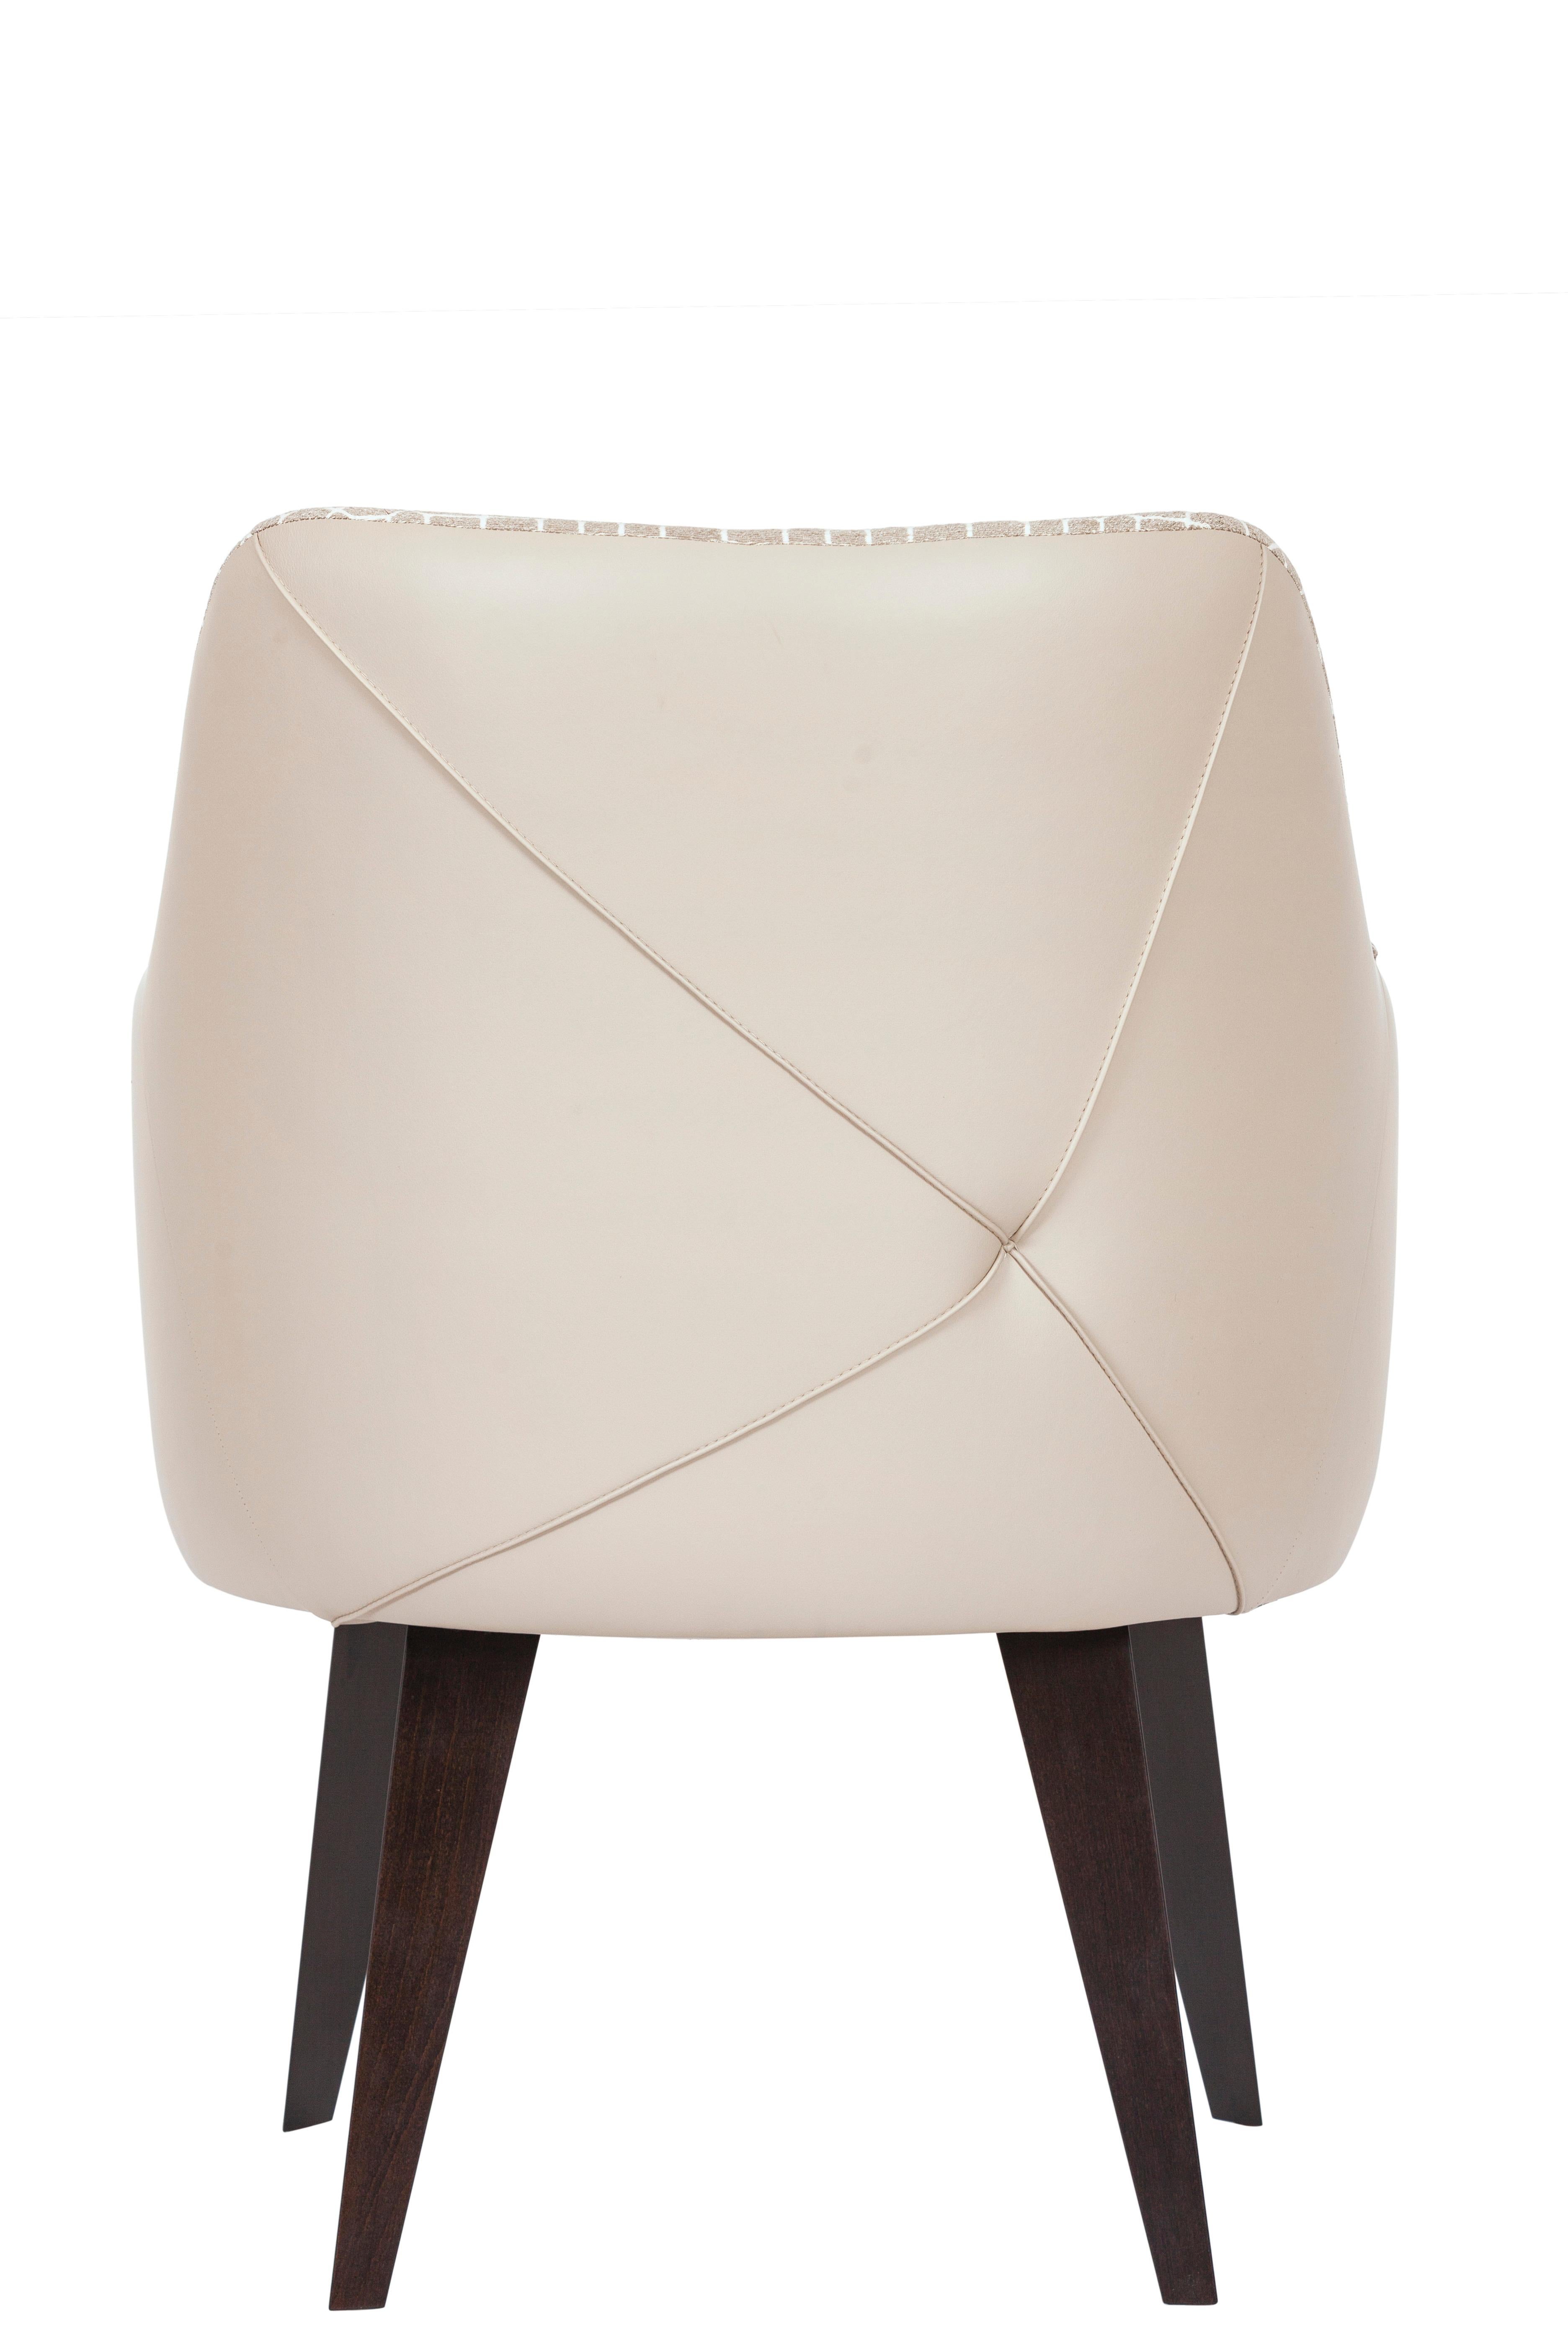 Modern Margot Dining Chairs, Cream Leather, Handmade in Portugal by Greenapple For Sale 4